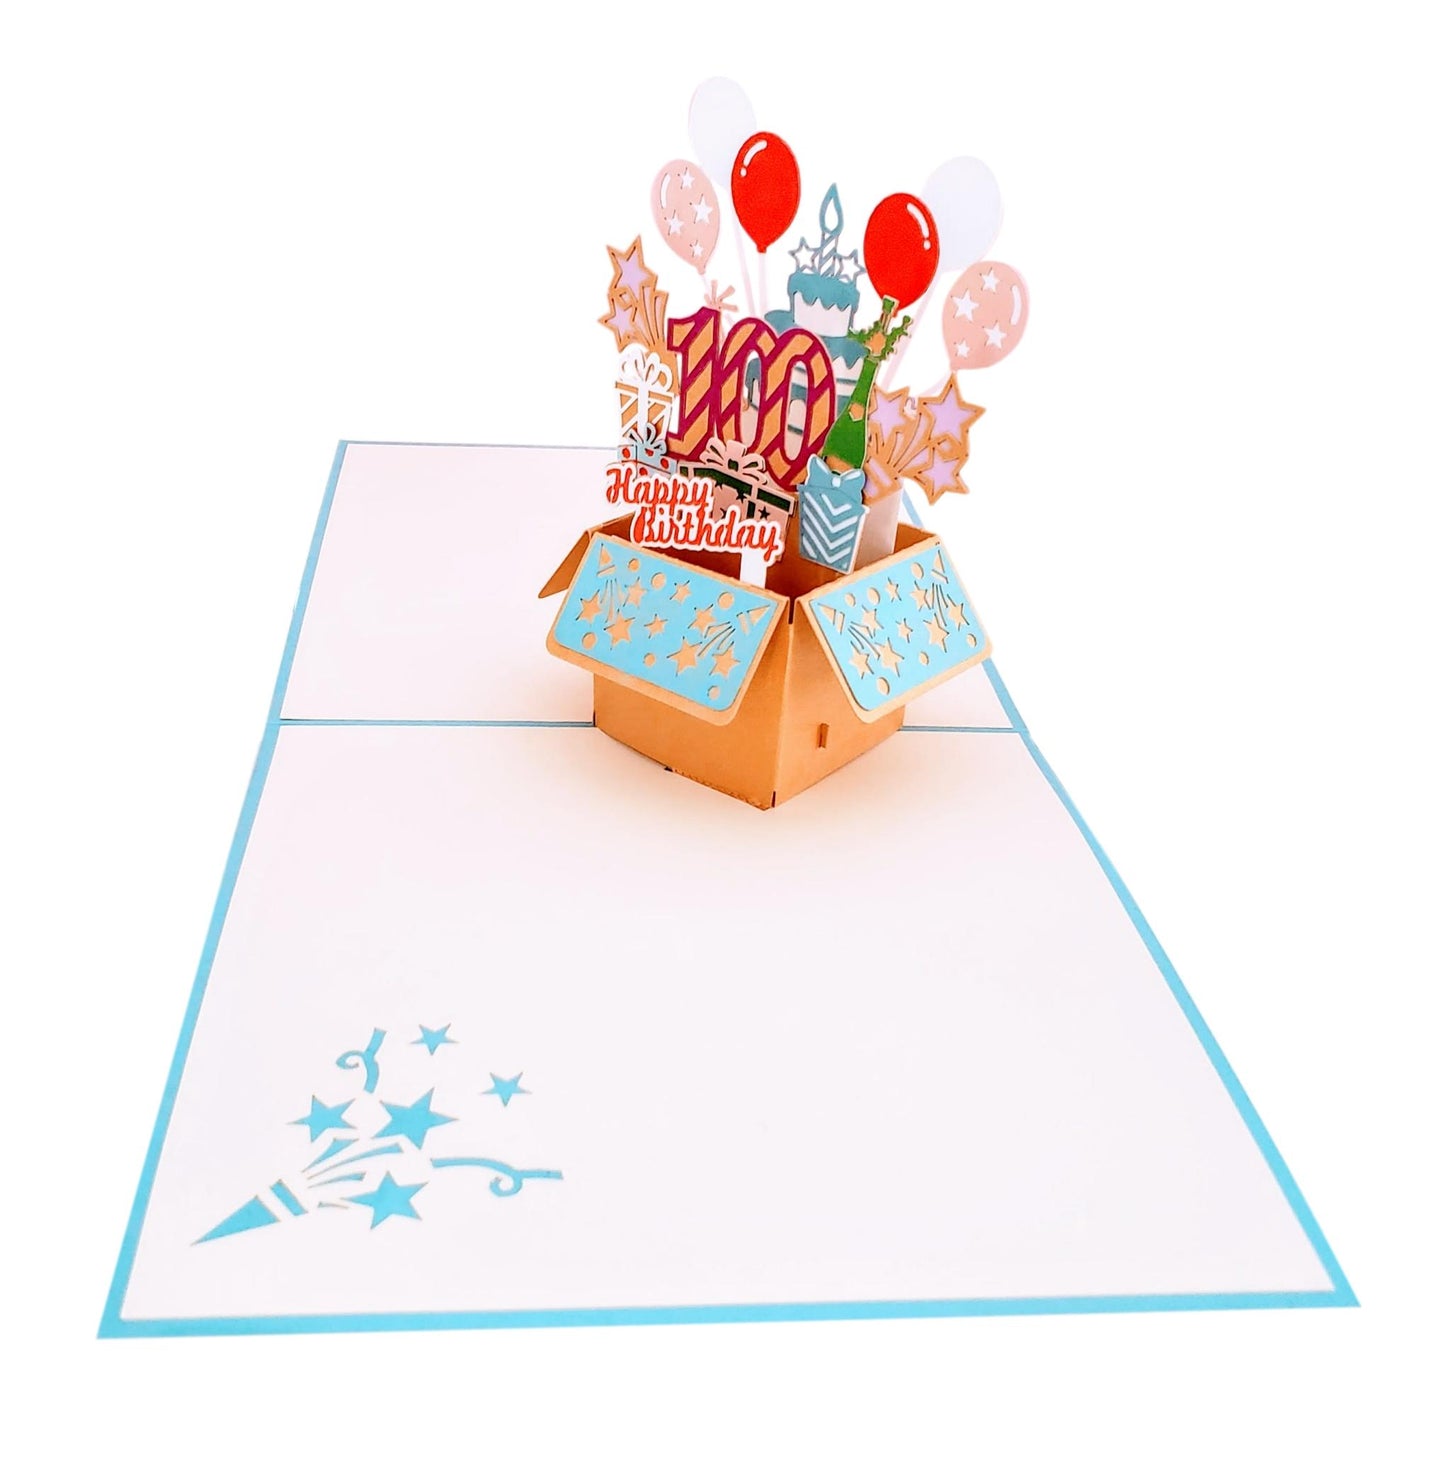 Happy 100th Birthday Blue Party Box 3D Pop Up Greeting Card - Birthday - Fun - Milestone - Special D - iGifts And Cards